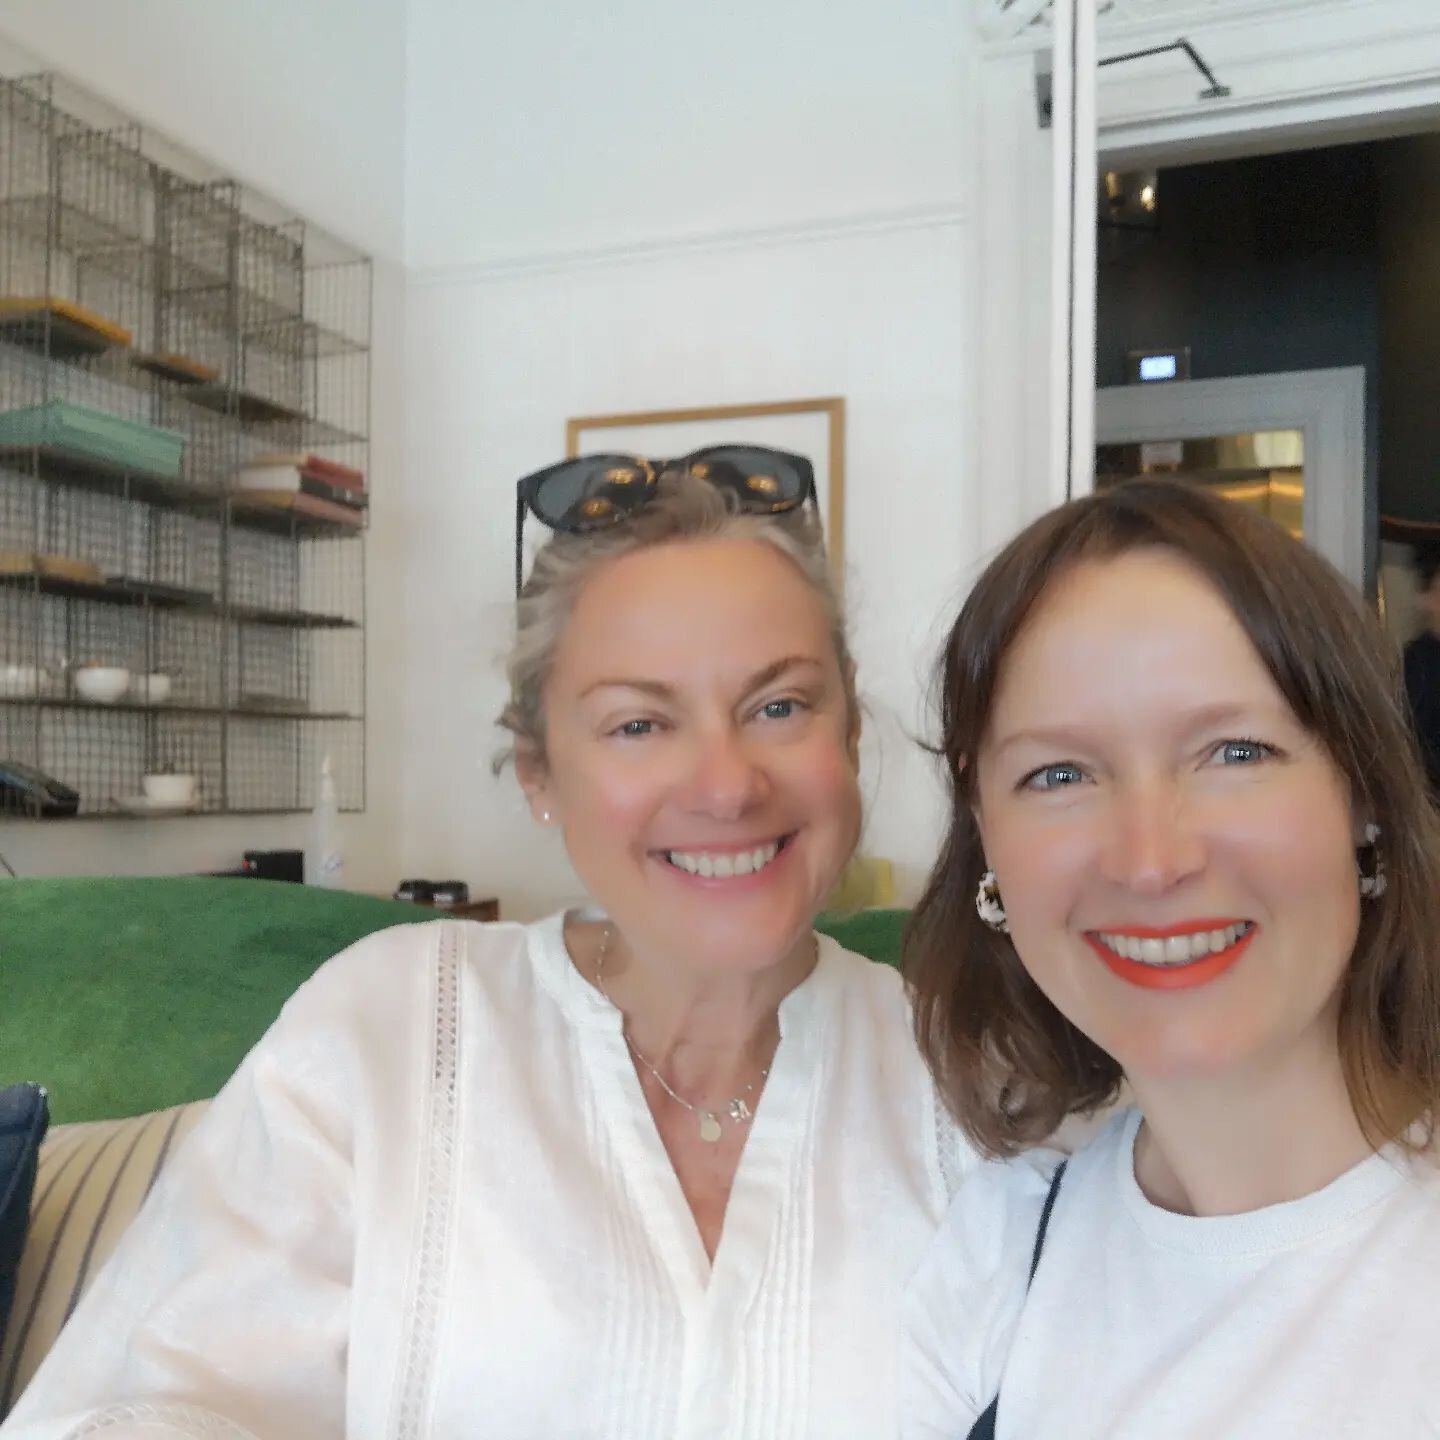 Reset +Restore Retreat 8-10 Sept, Rye
I am delighted to announce that I will be co-hosting a women's retreat later this year with my beautiful friend and sister in law Helen from @helennurturehealthandwellness
Helen and I have known each other since 